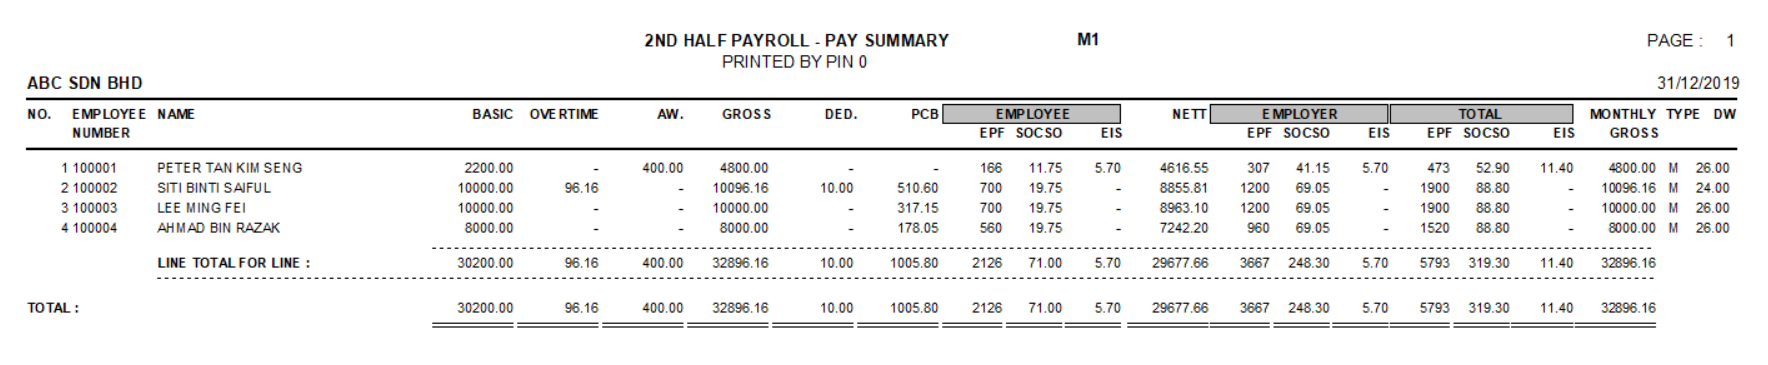 Access UBS Payroll Software - Pay 150 - (Compliance with EIS 2018)